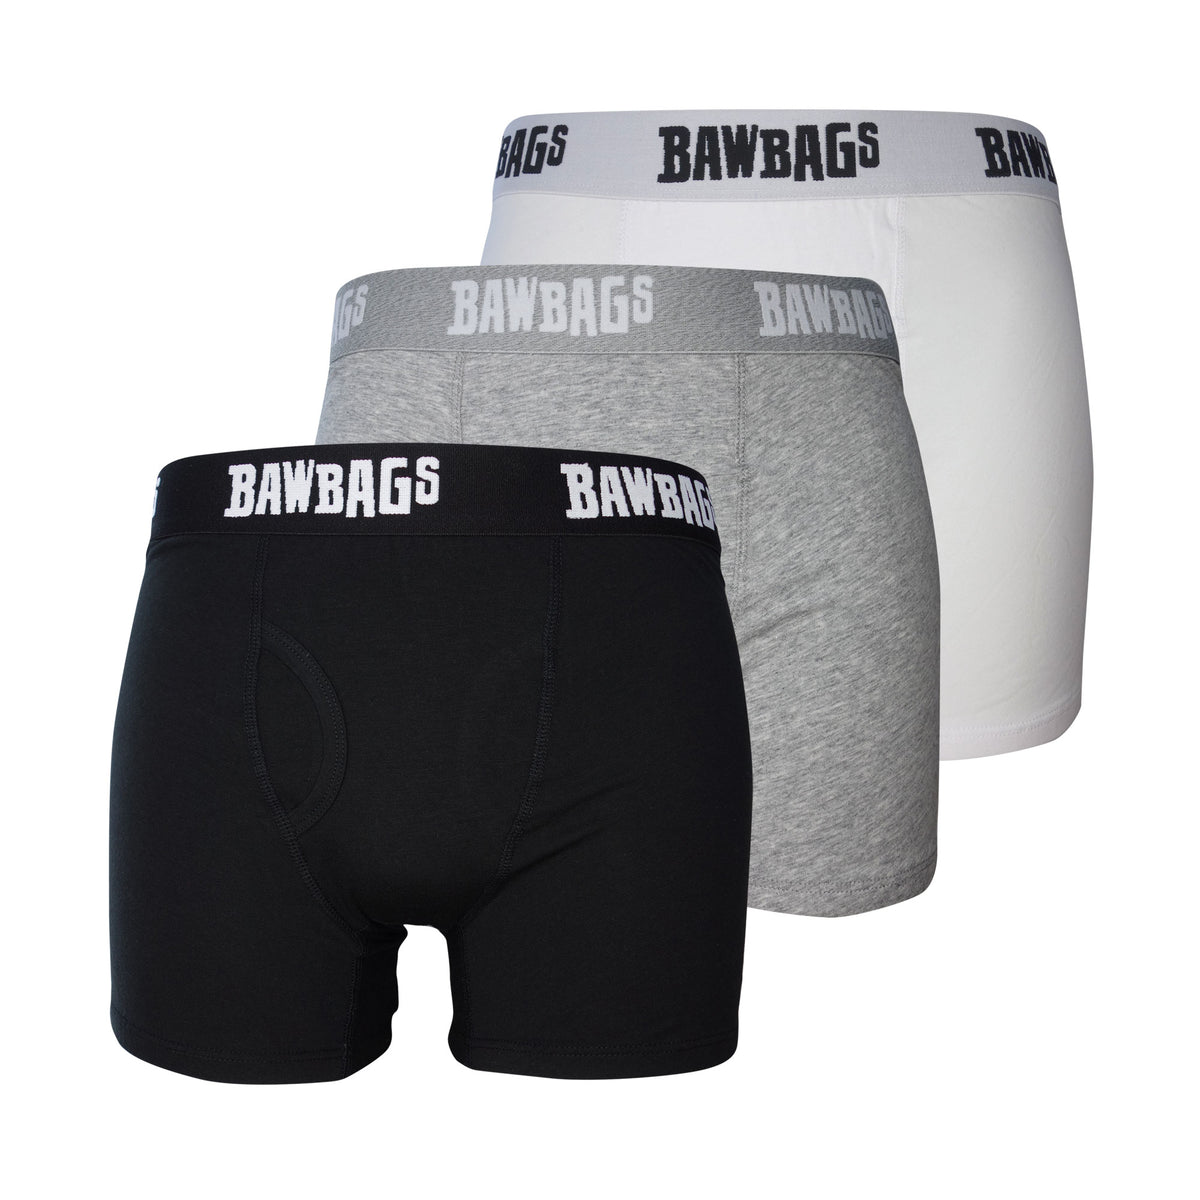 New Classic 3-Pack Cotton Boxer Shorts